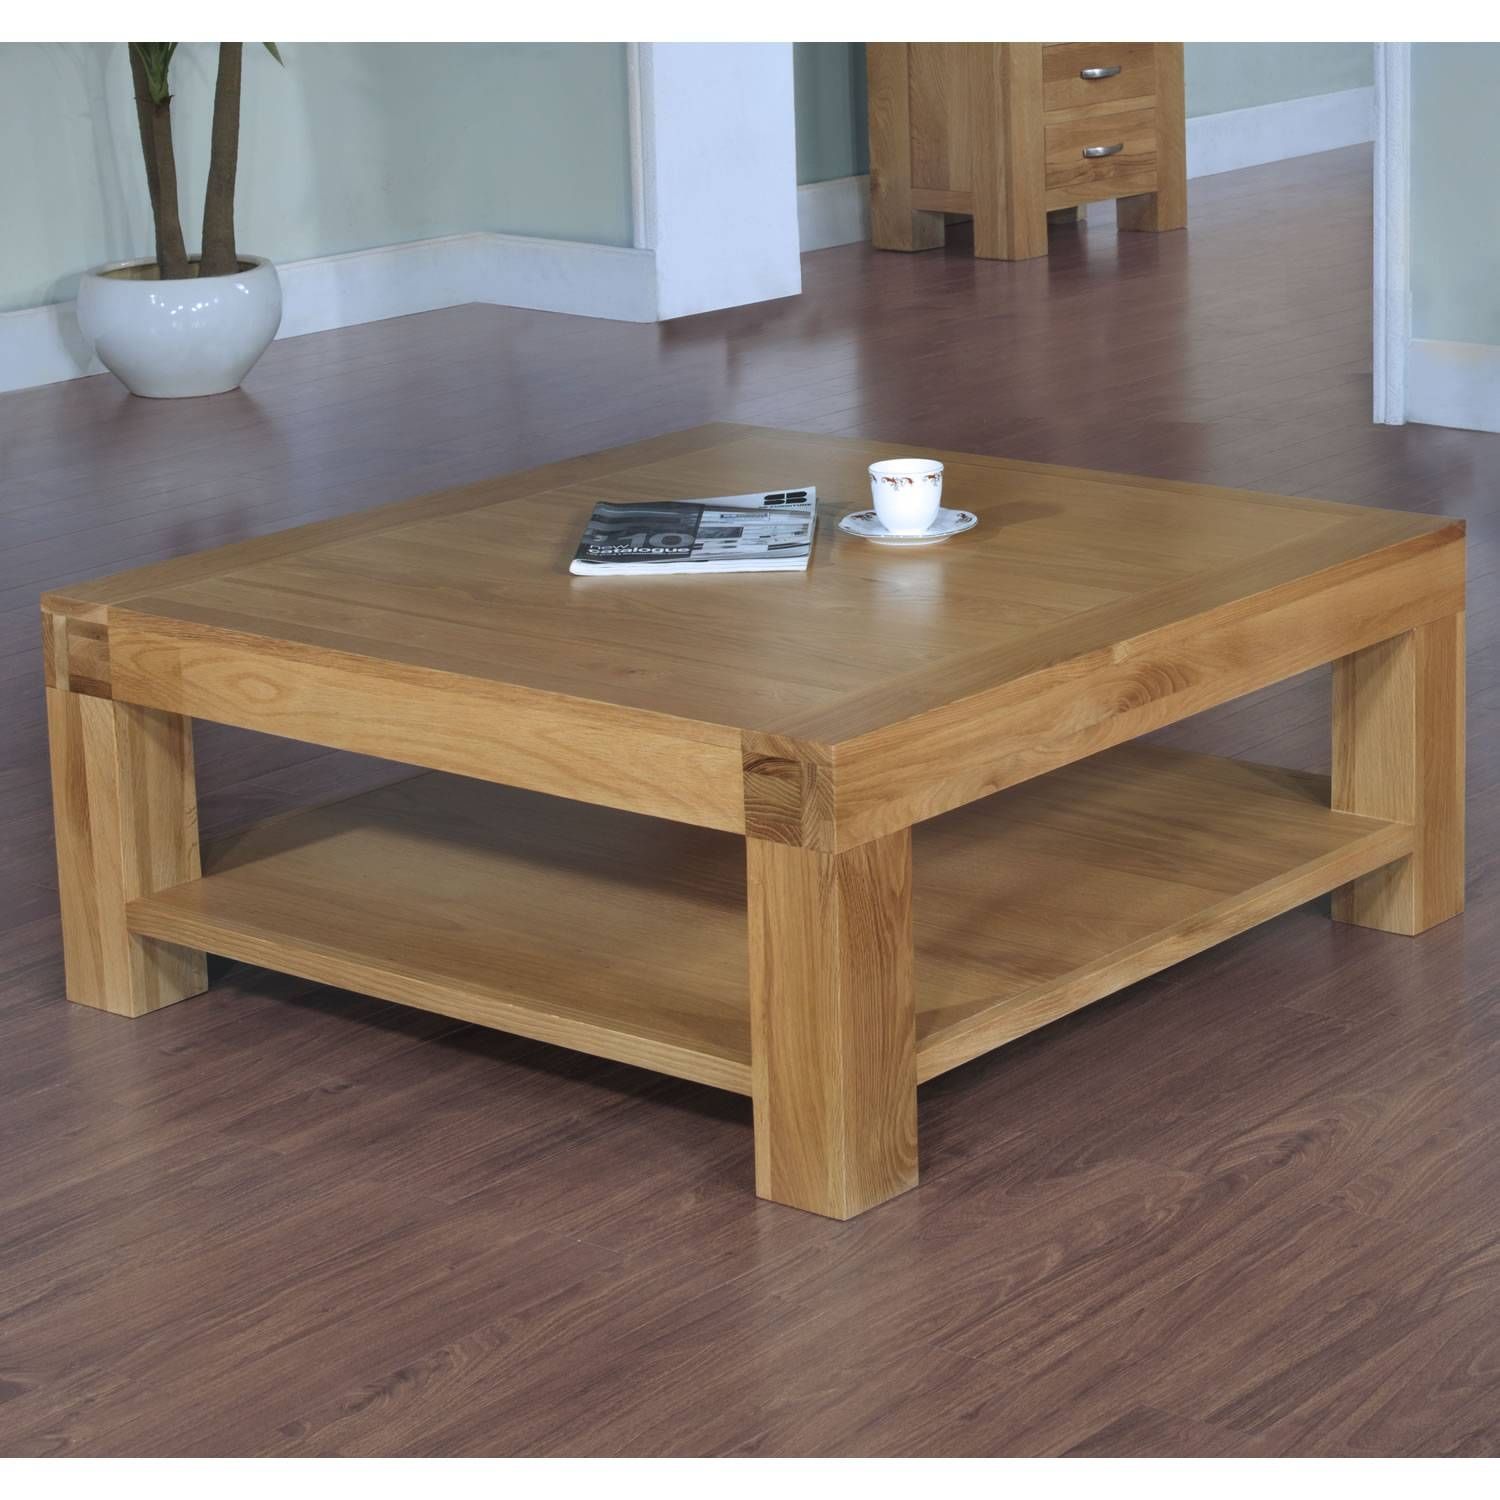 Square Rustic Coffee Table With Storage : Pine Square Rustic Regarding Rustic Square Coffee Table With Storage (View 10 of 15)